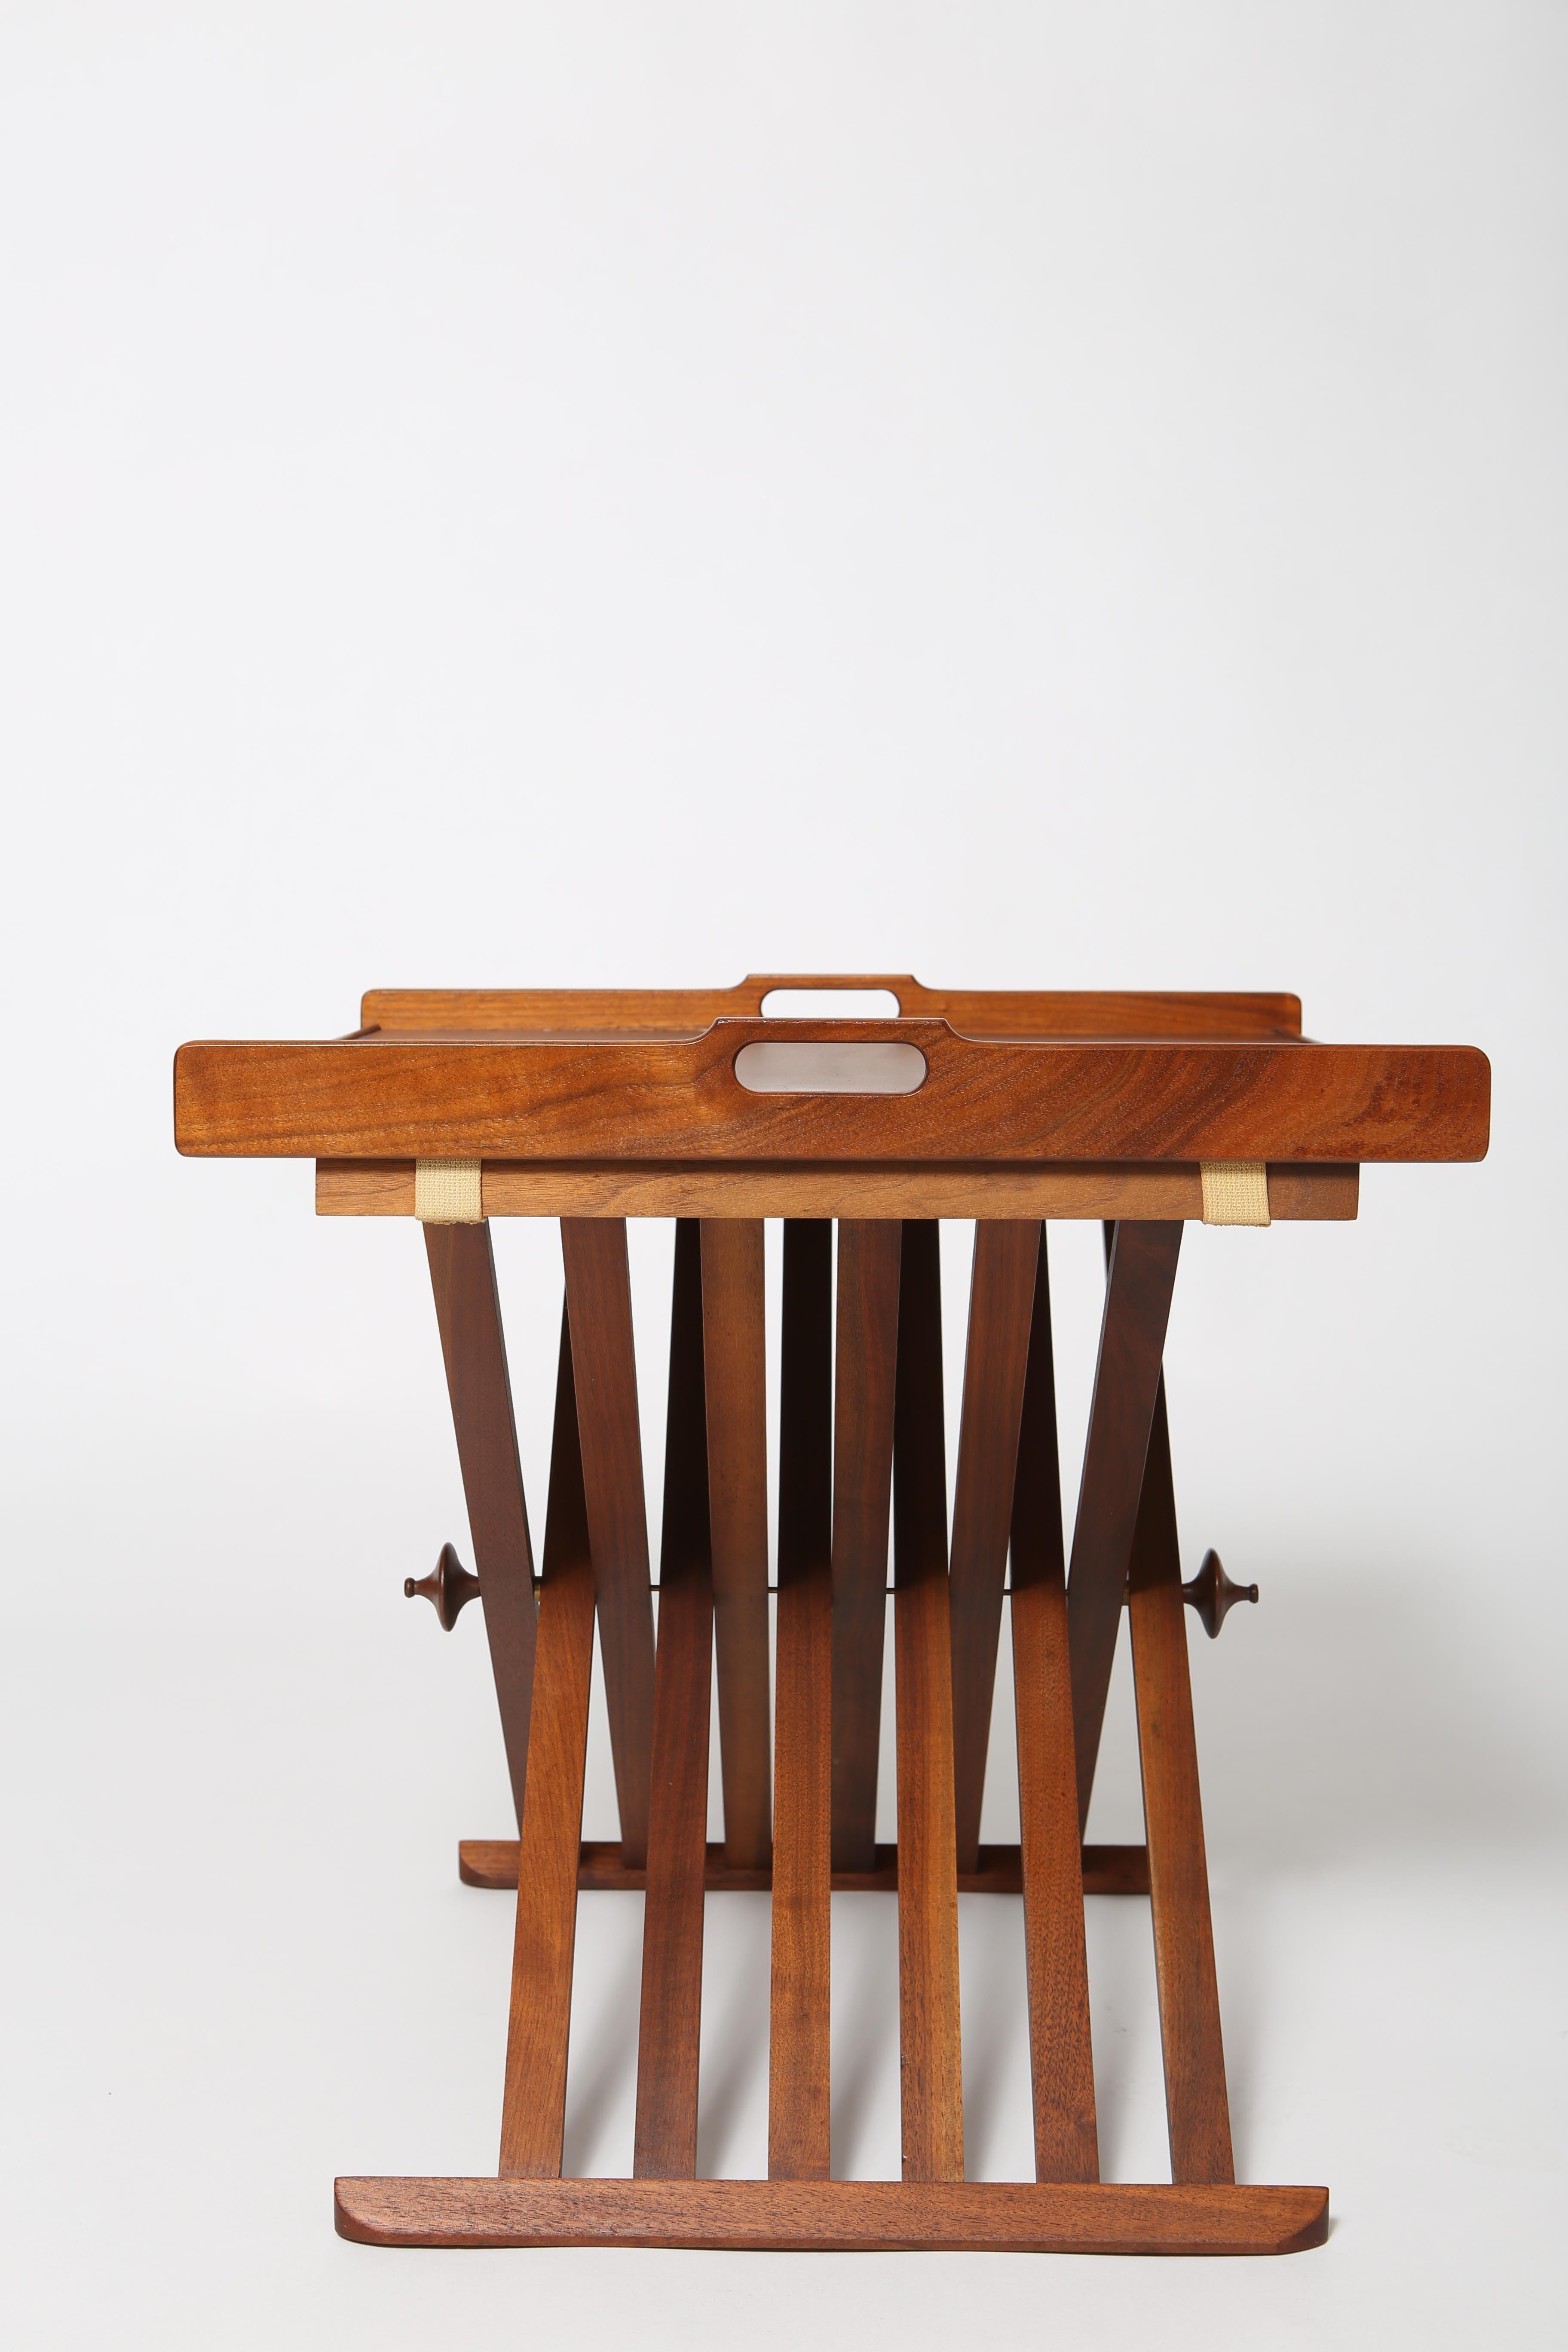 20th Century Campaign-style tray table by Kipp Stewart